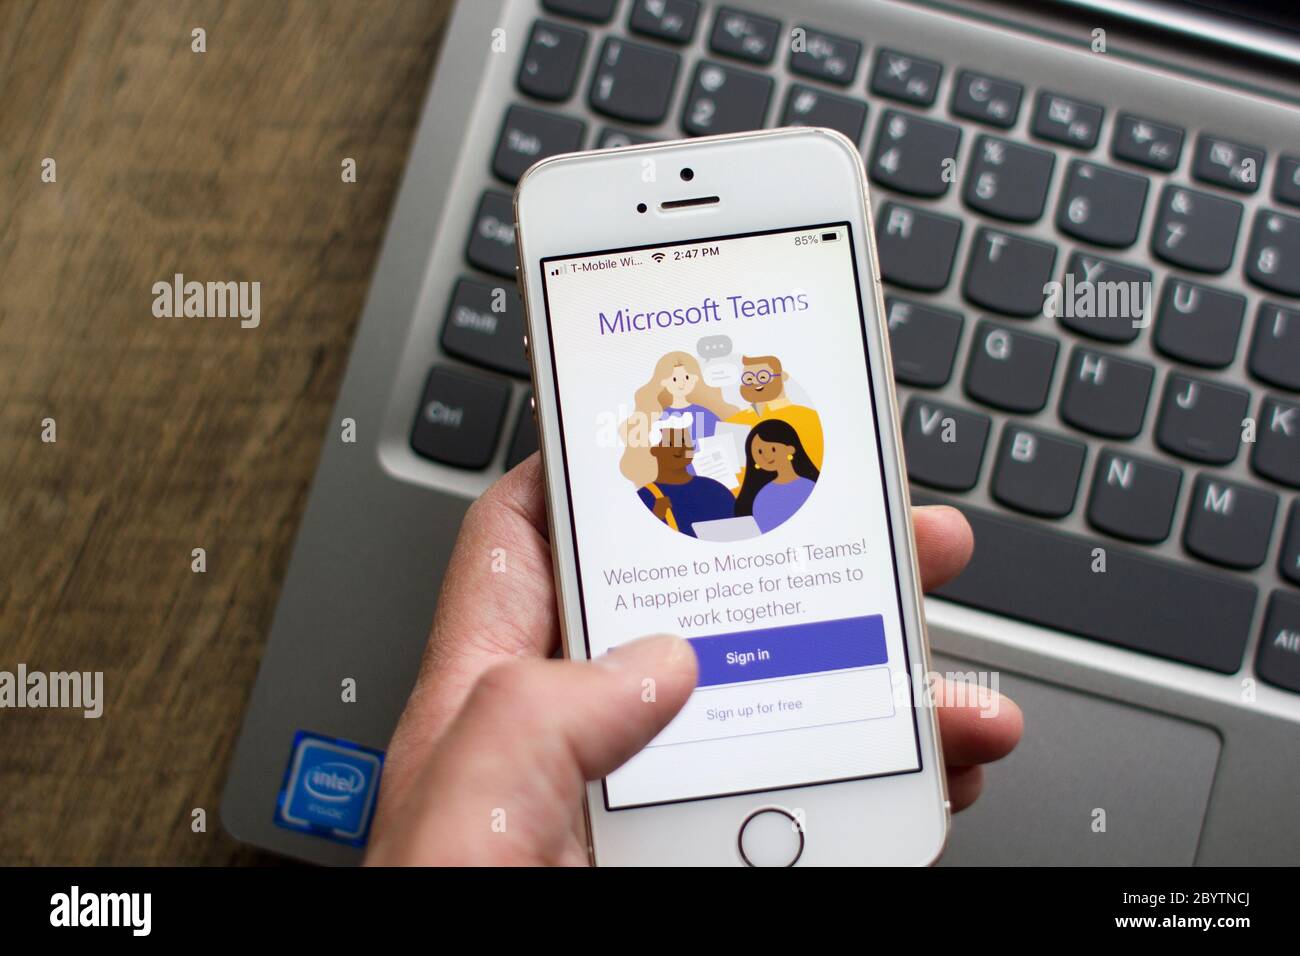 A user opens the Microsoft Teams mobile app. Teams is a unified team communication and collaboration platform with workplace chat, video meetings, etc. Stock Photo